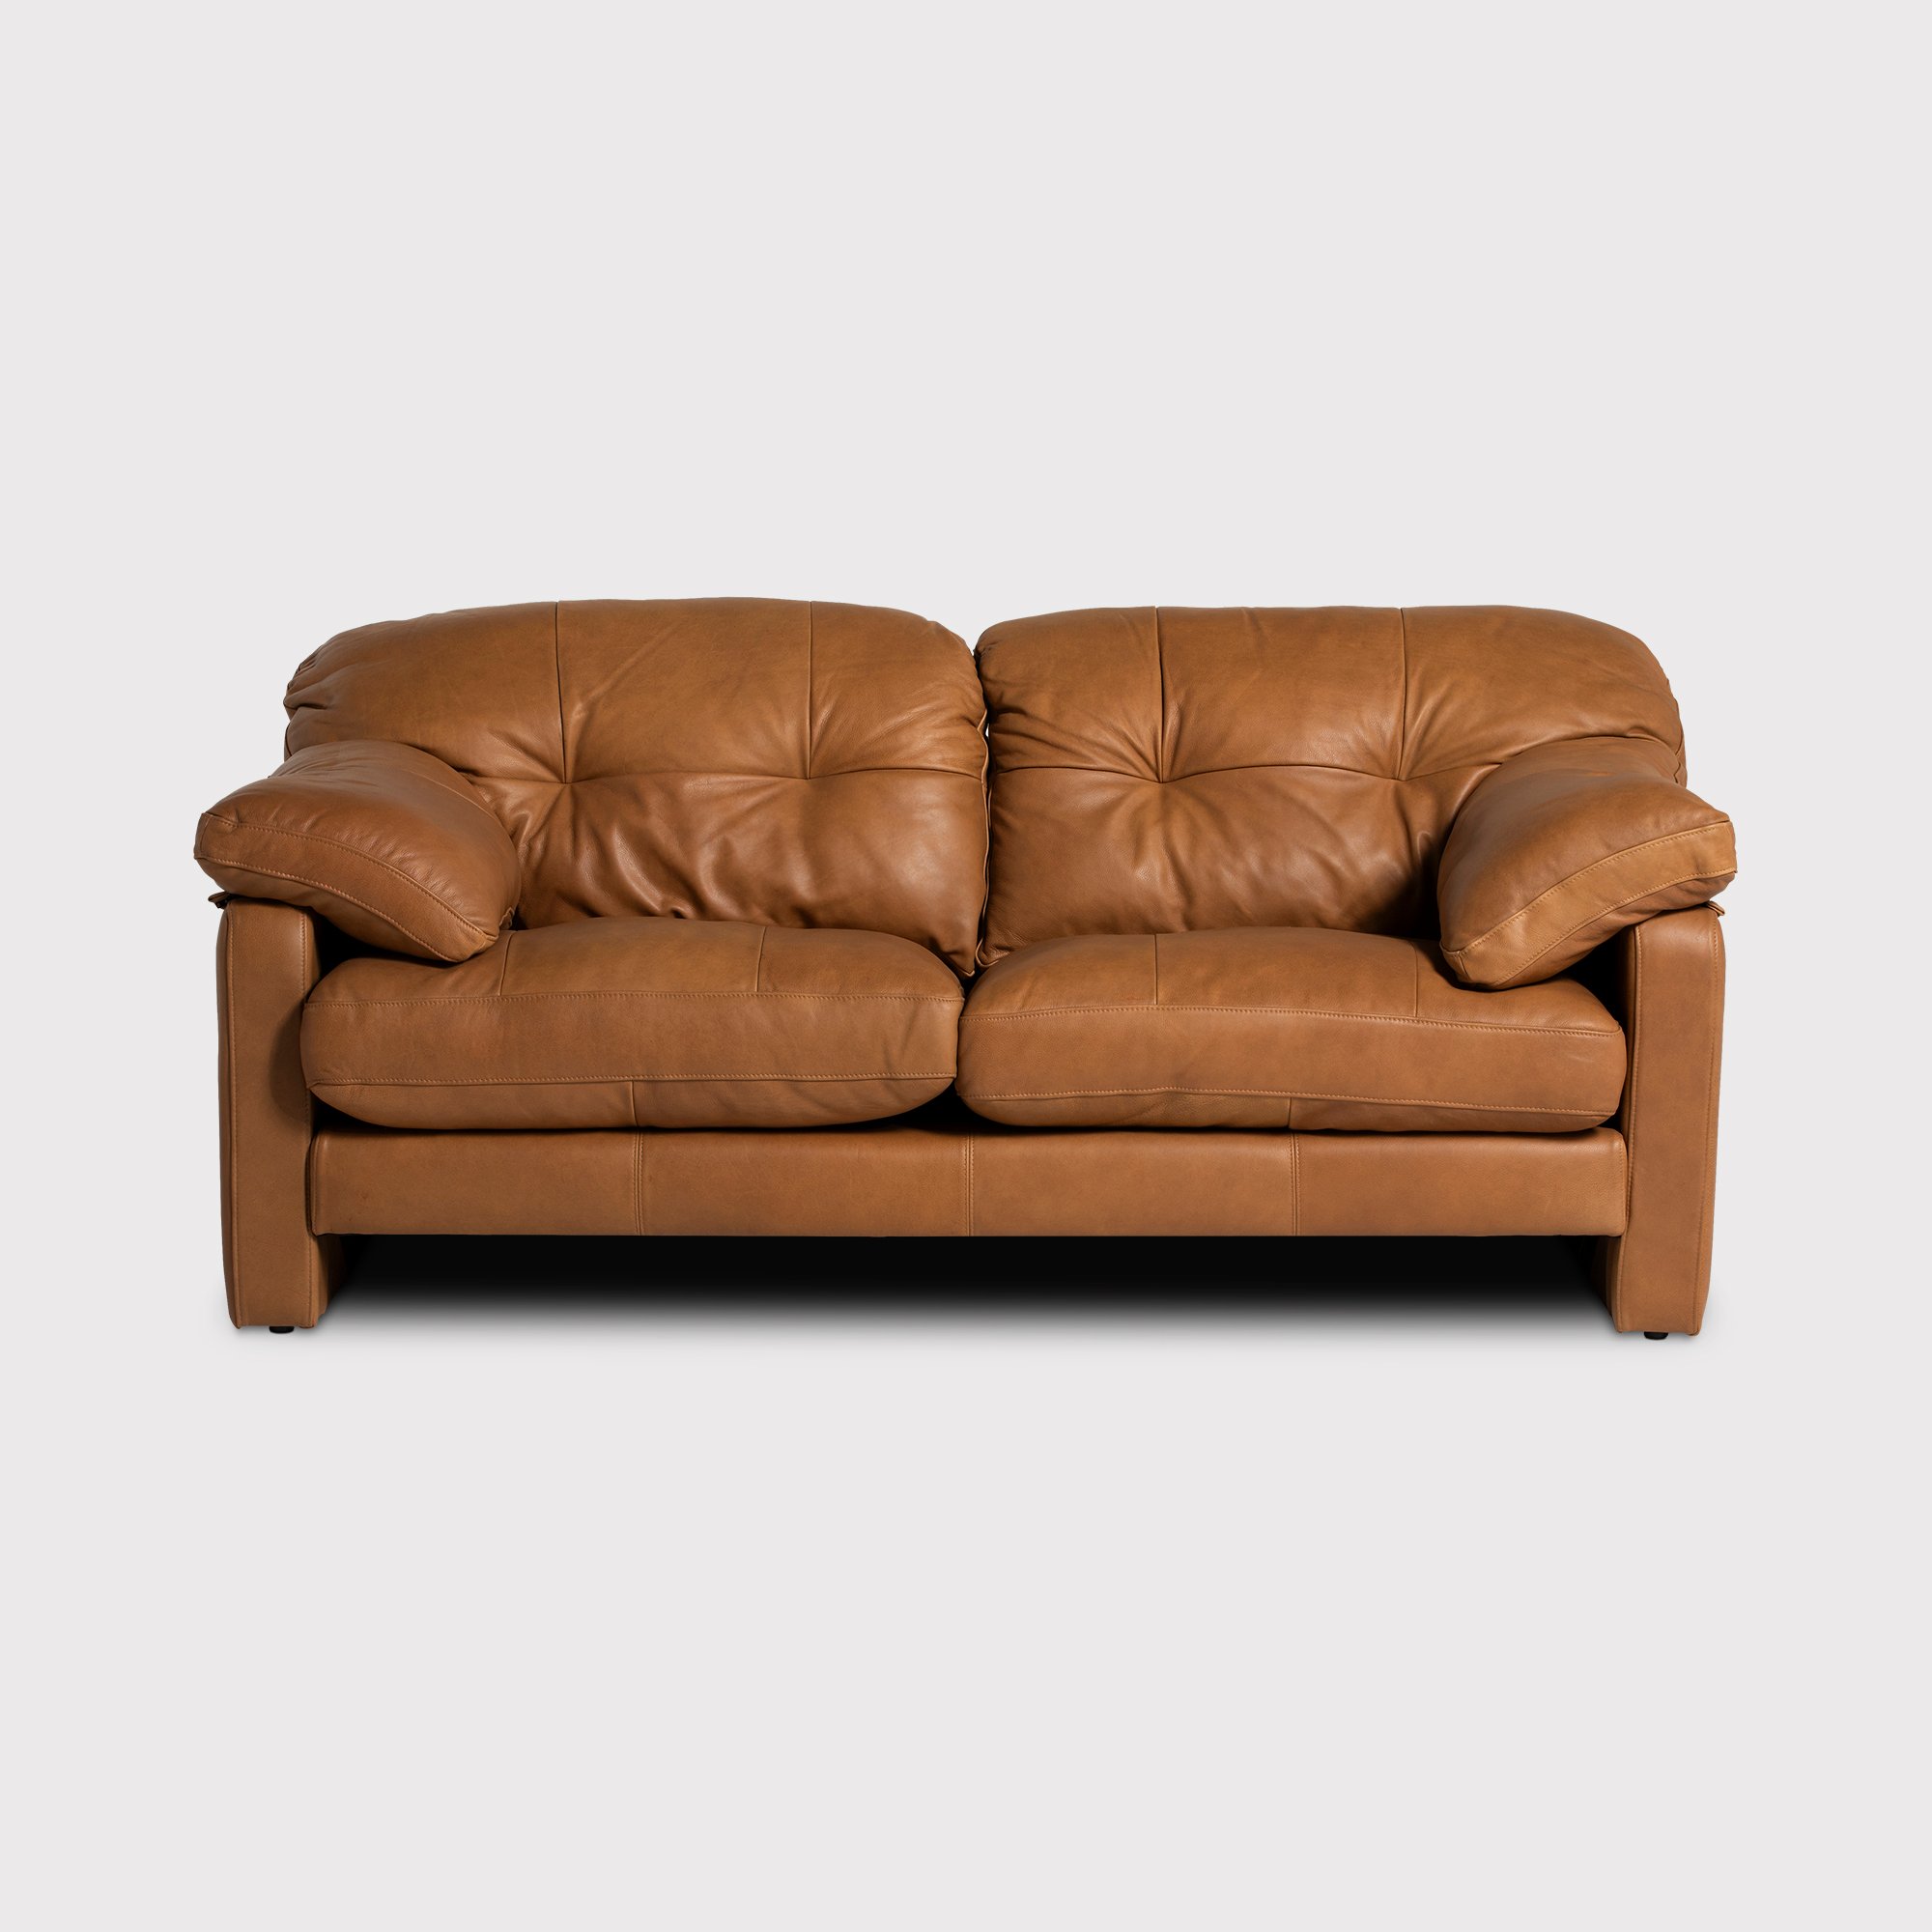 Penley 2 Seater Sofa, Brown | Barker & Stonehouse